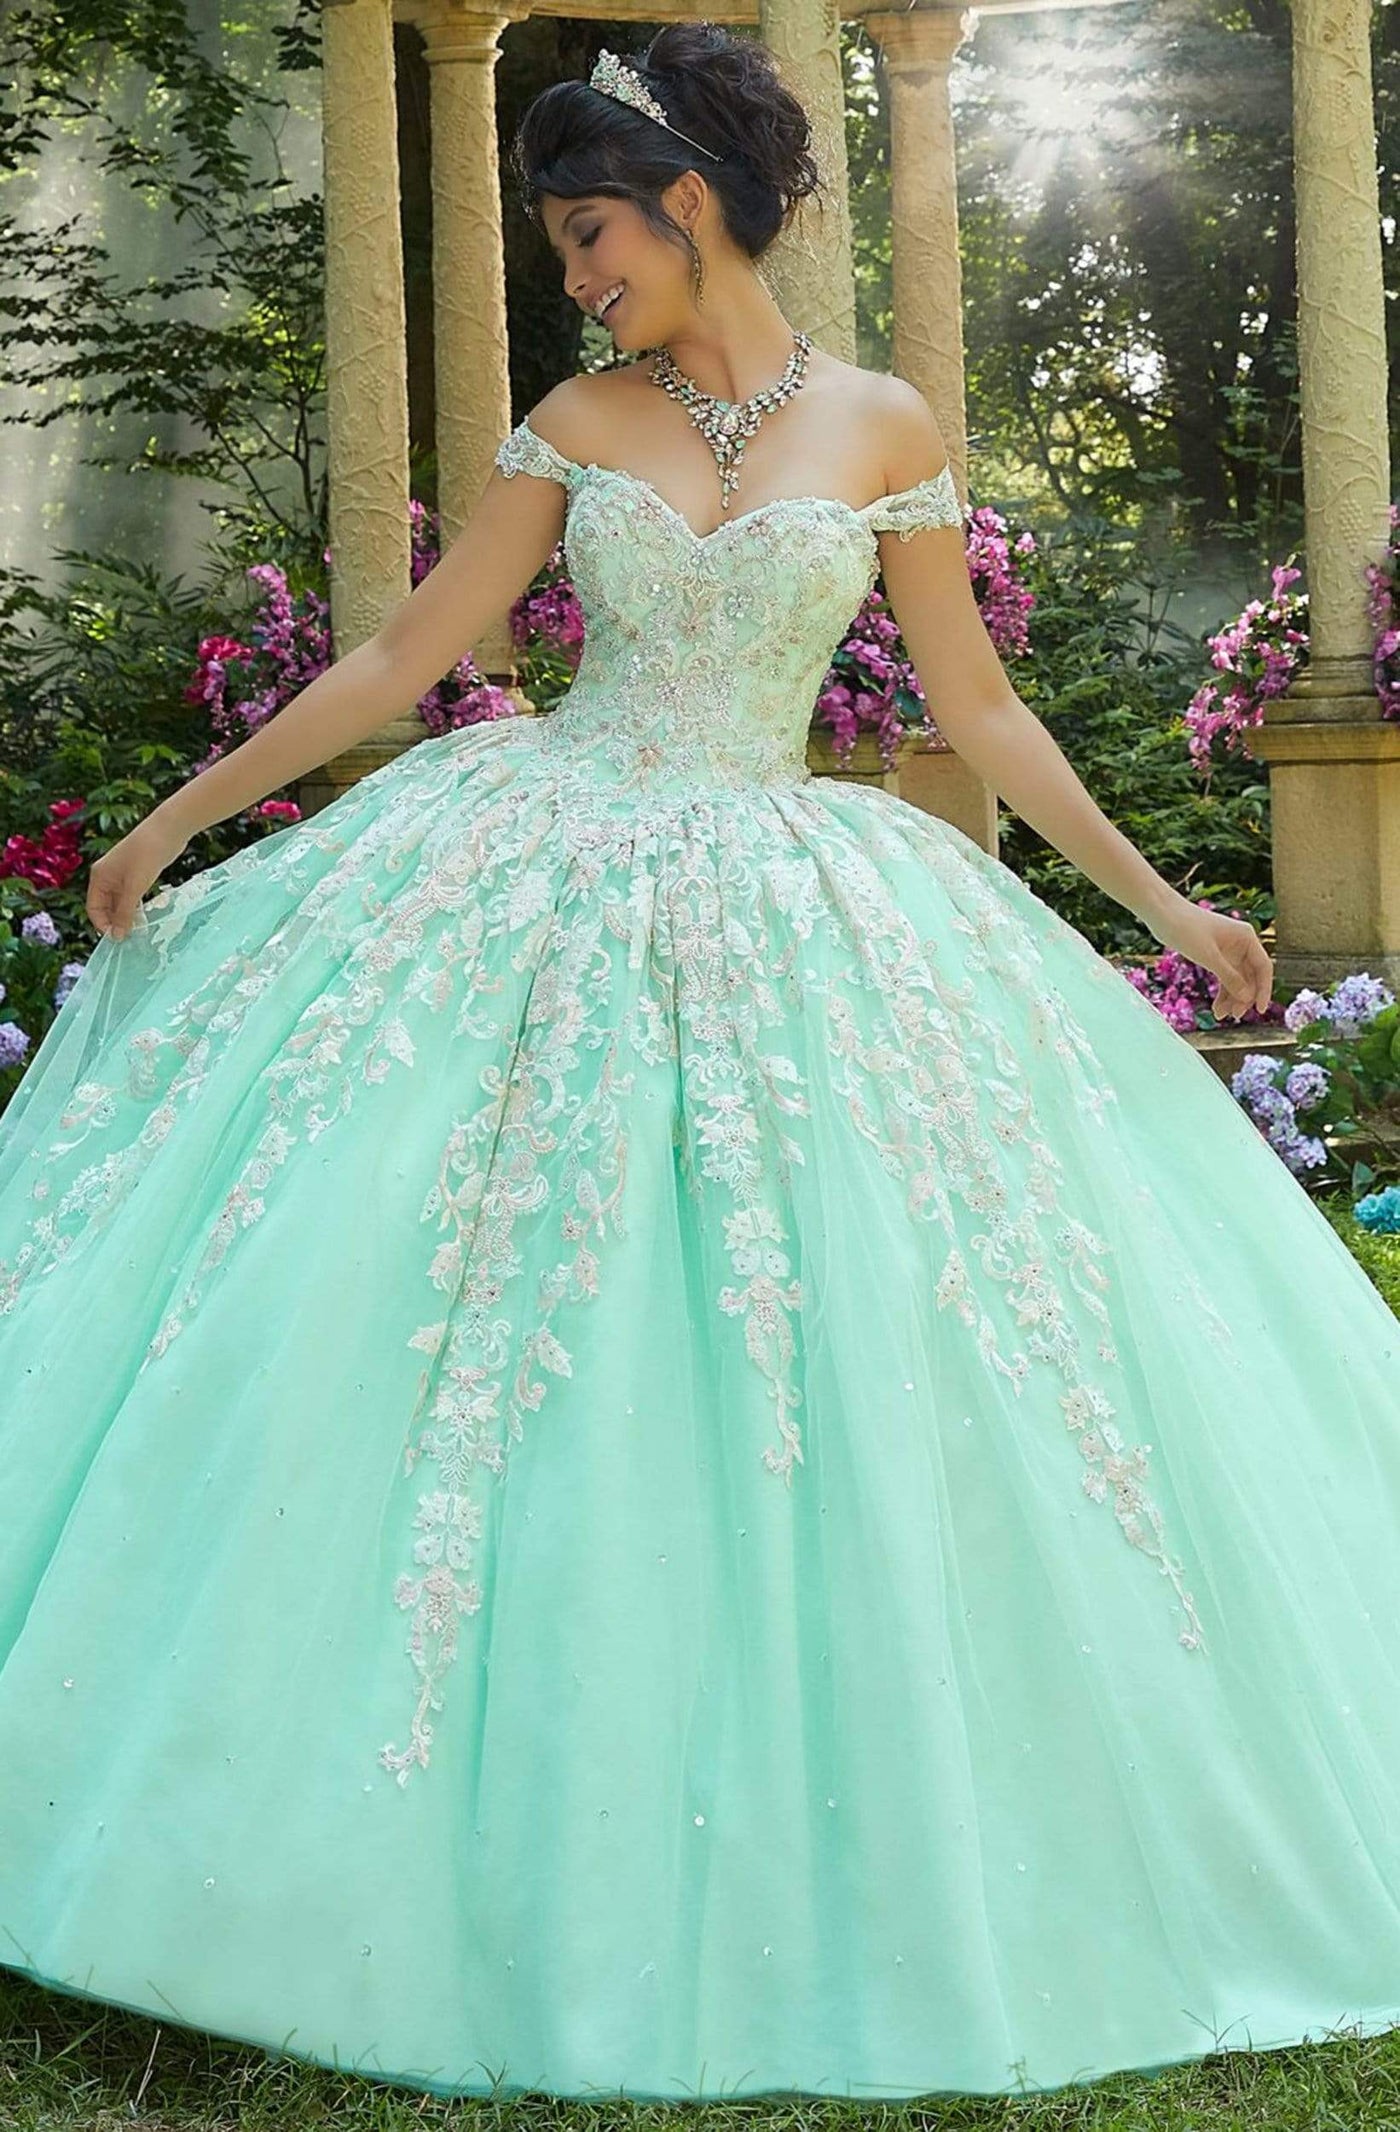 Vizcaya by Mori Lee - 89264 Embellished Sweetheart Ballgown Quinceanera Dresses 0 / Mint